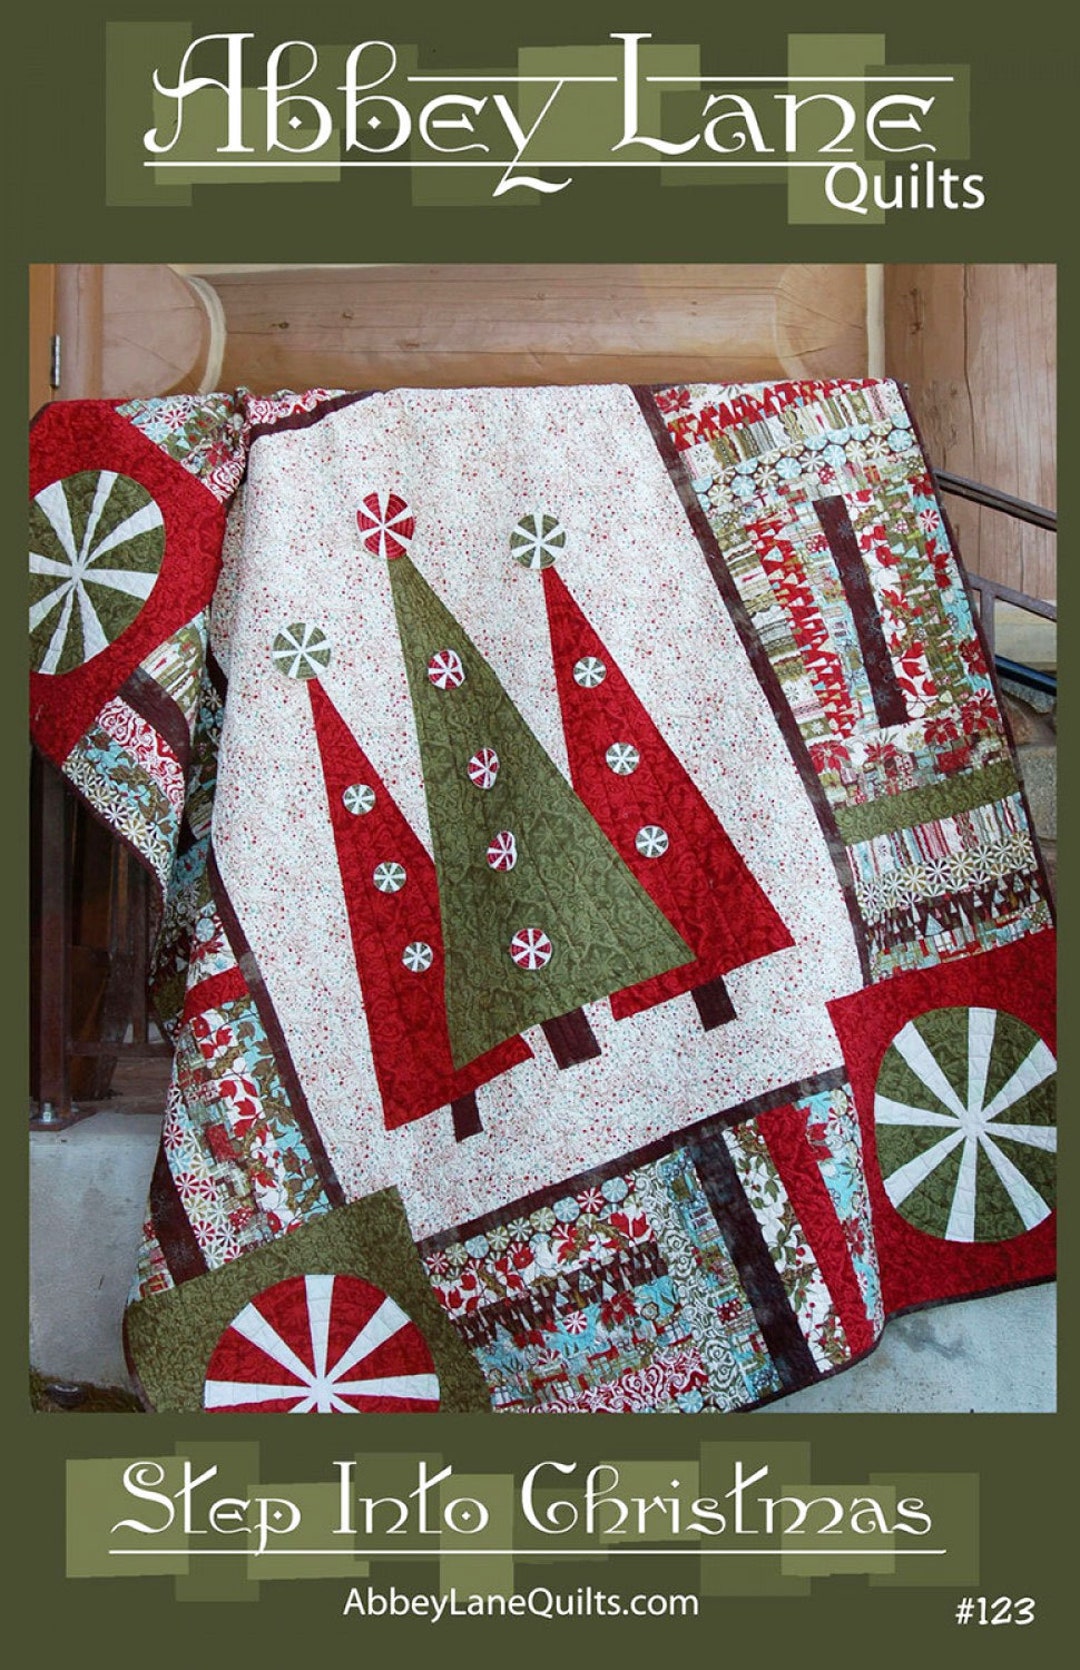 Pin by Annemarie S.J. de Vreese on Christmas quilt